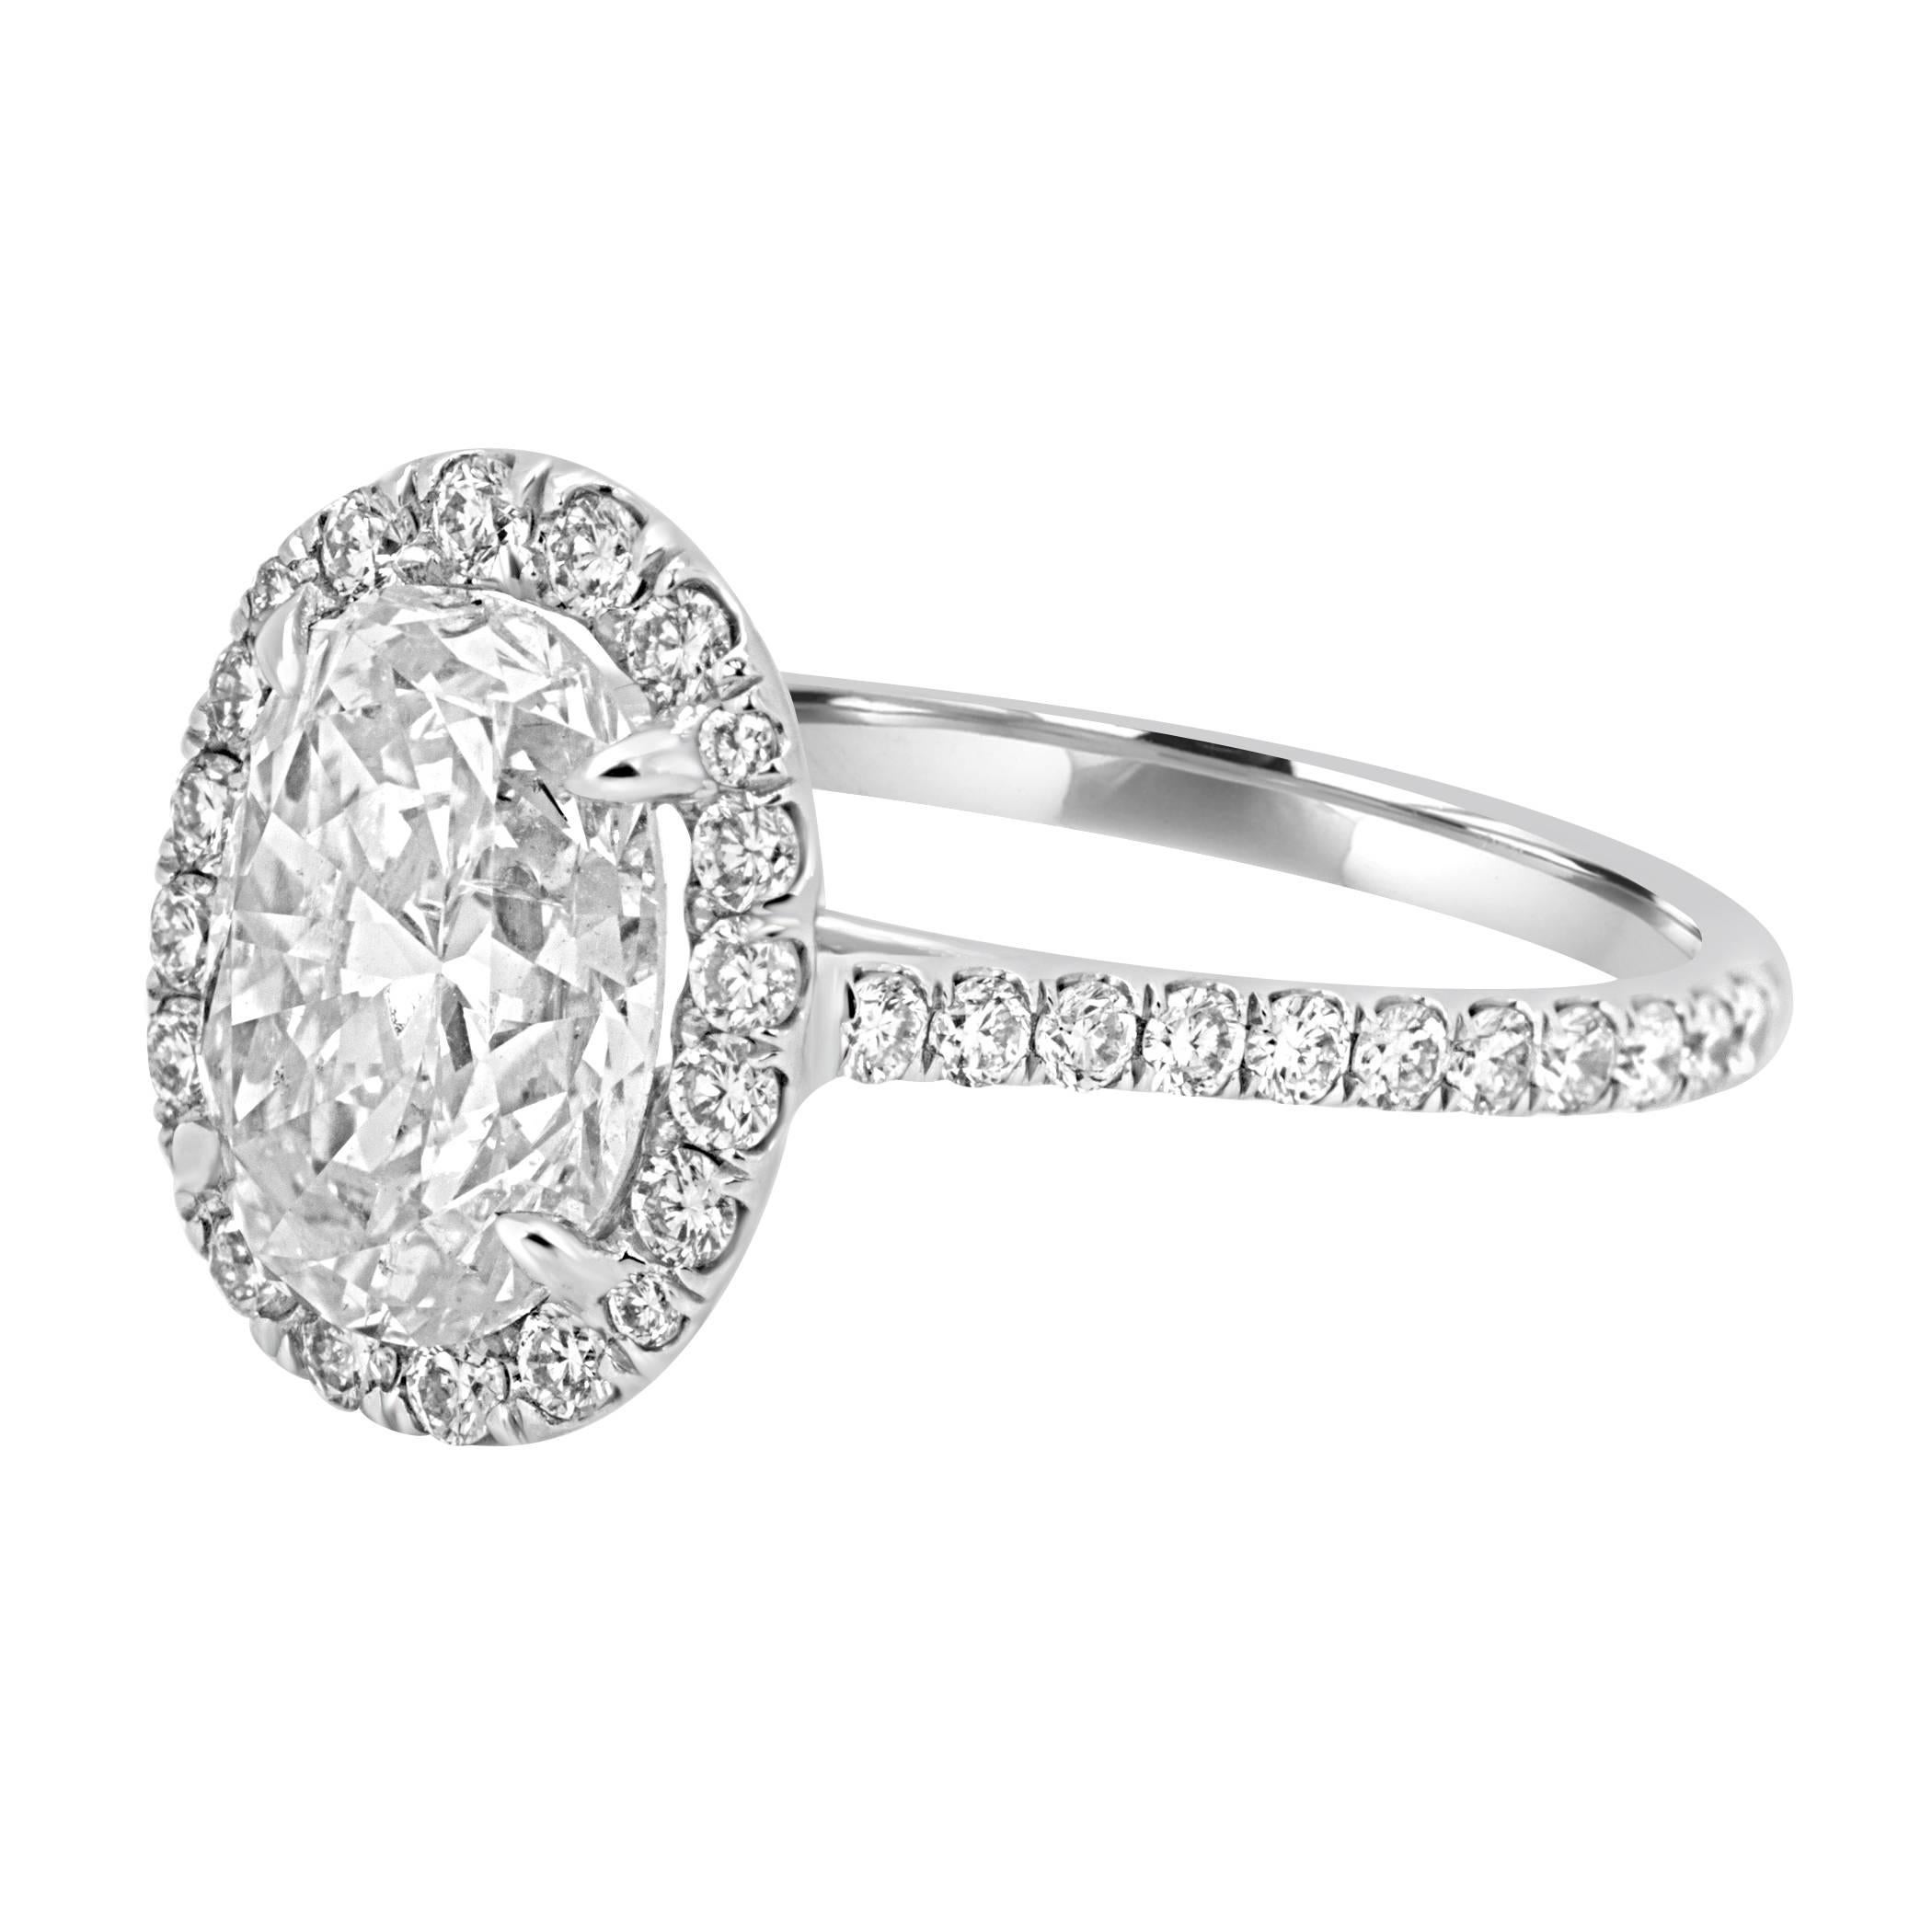 EGL USA Certified I Color SI2 Clarity Oval Diamond 2.48 Carat penciled in a Halo of Natural White Diamond 0.60 Carat in a Beautiful Delicate Handmade Bridal 18K White Gold Ring.

MADE IN USA

Total Diamond Weight 3.08 carat
MATCHING BAND